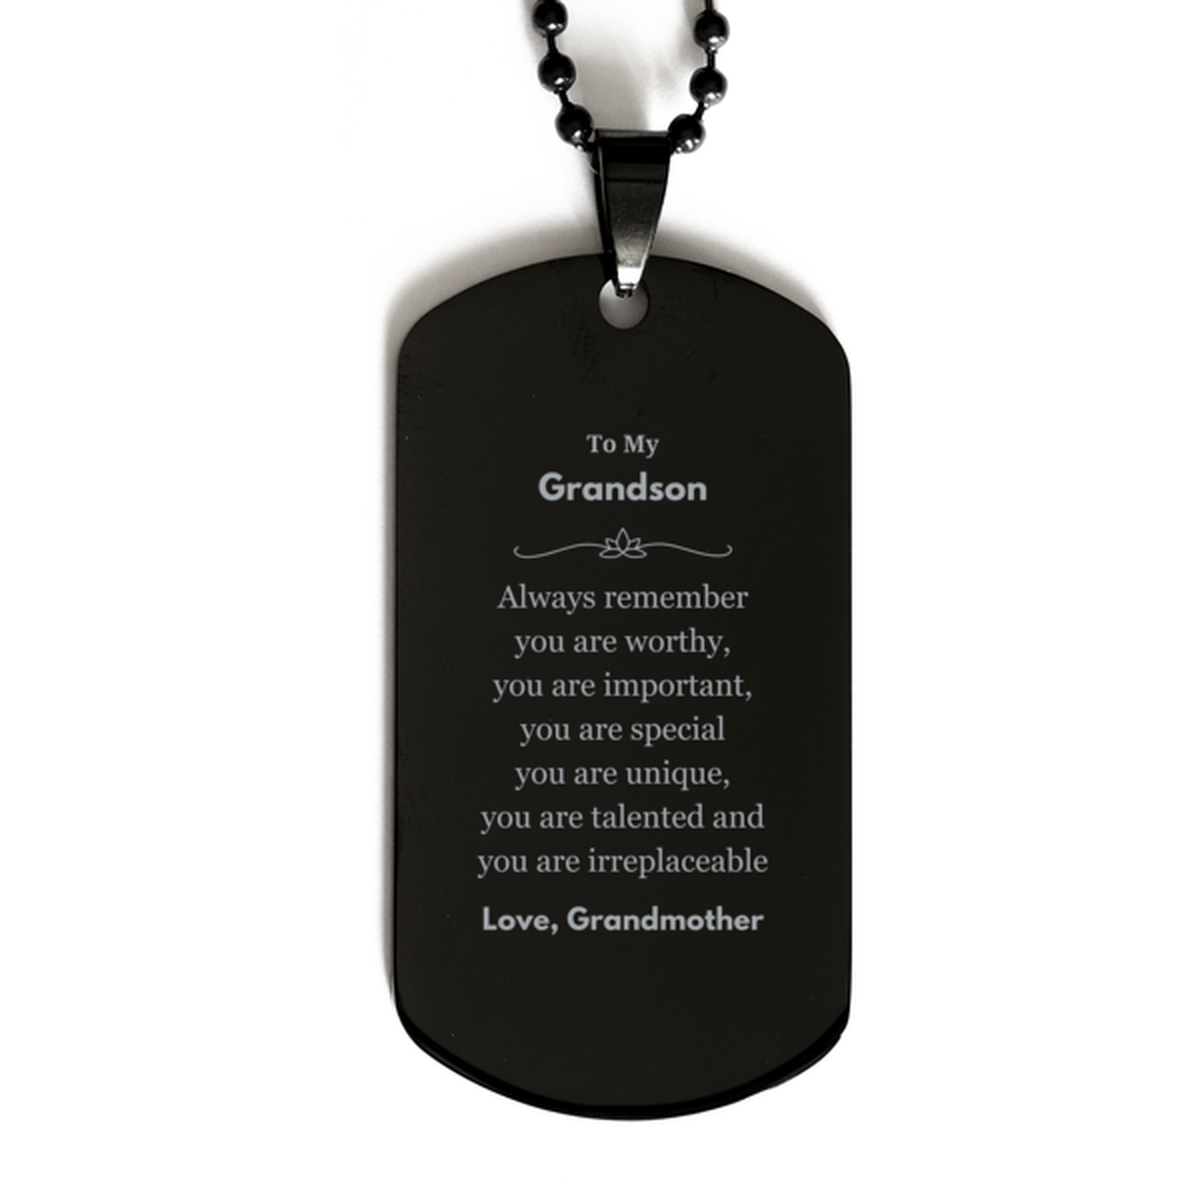 Grandson Birthday Gifts from Grandmother, Inspirational Black Dog Tag for Grandson Christmas Graduation Gifts for Grandson Always remember you are worthy, you are important. Love, Grandmother